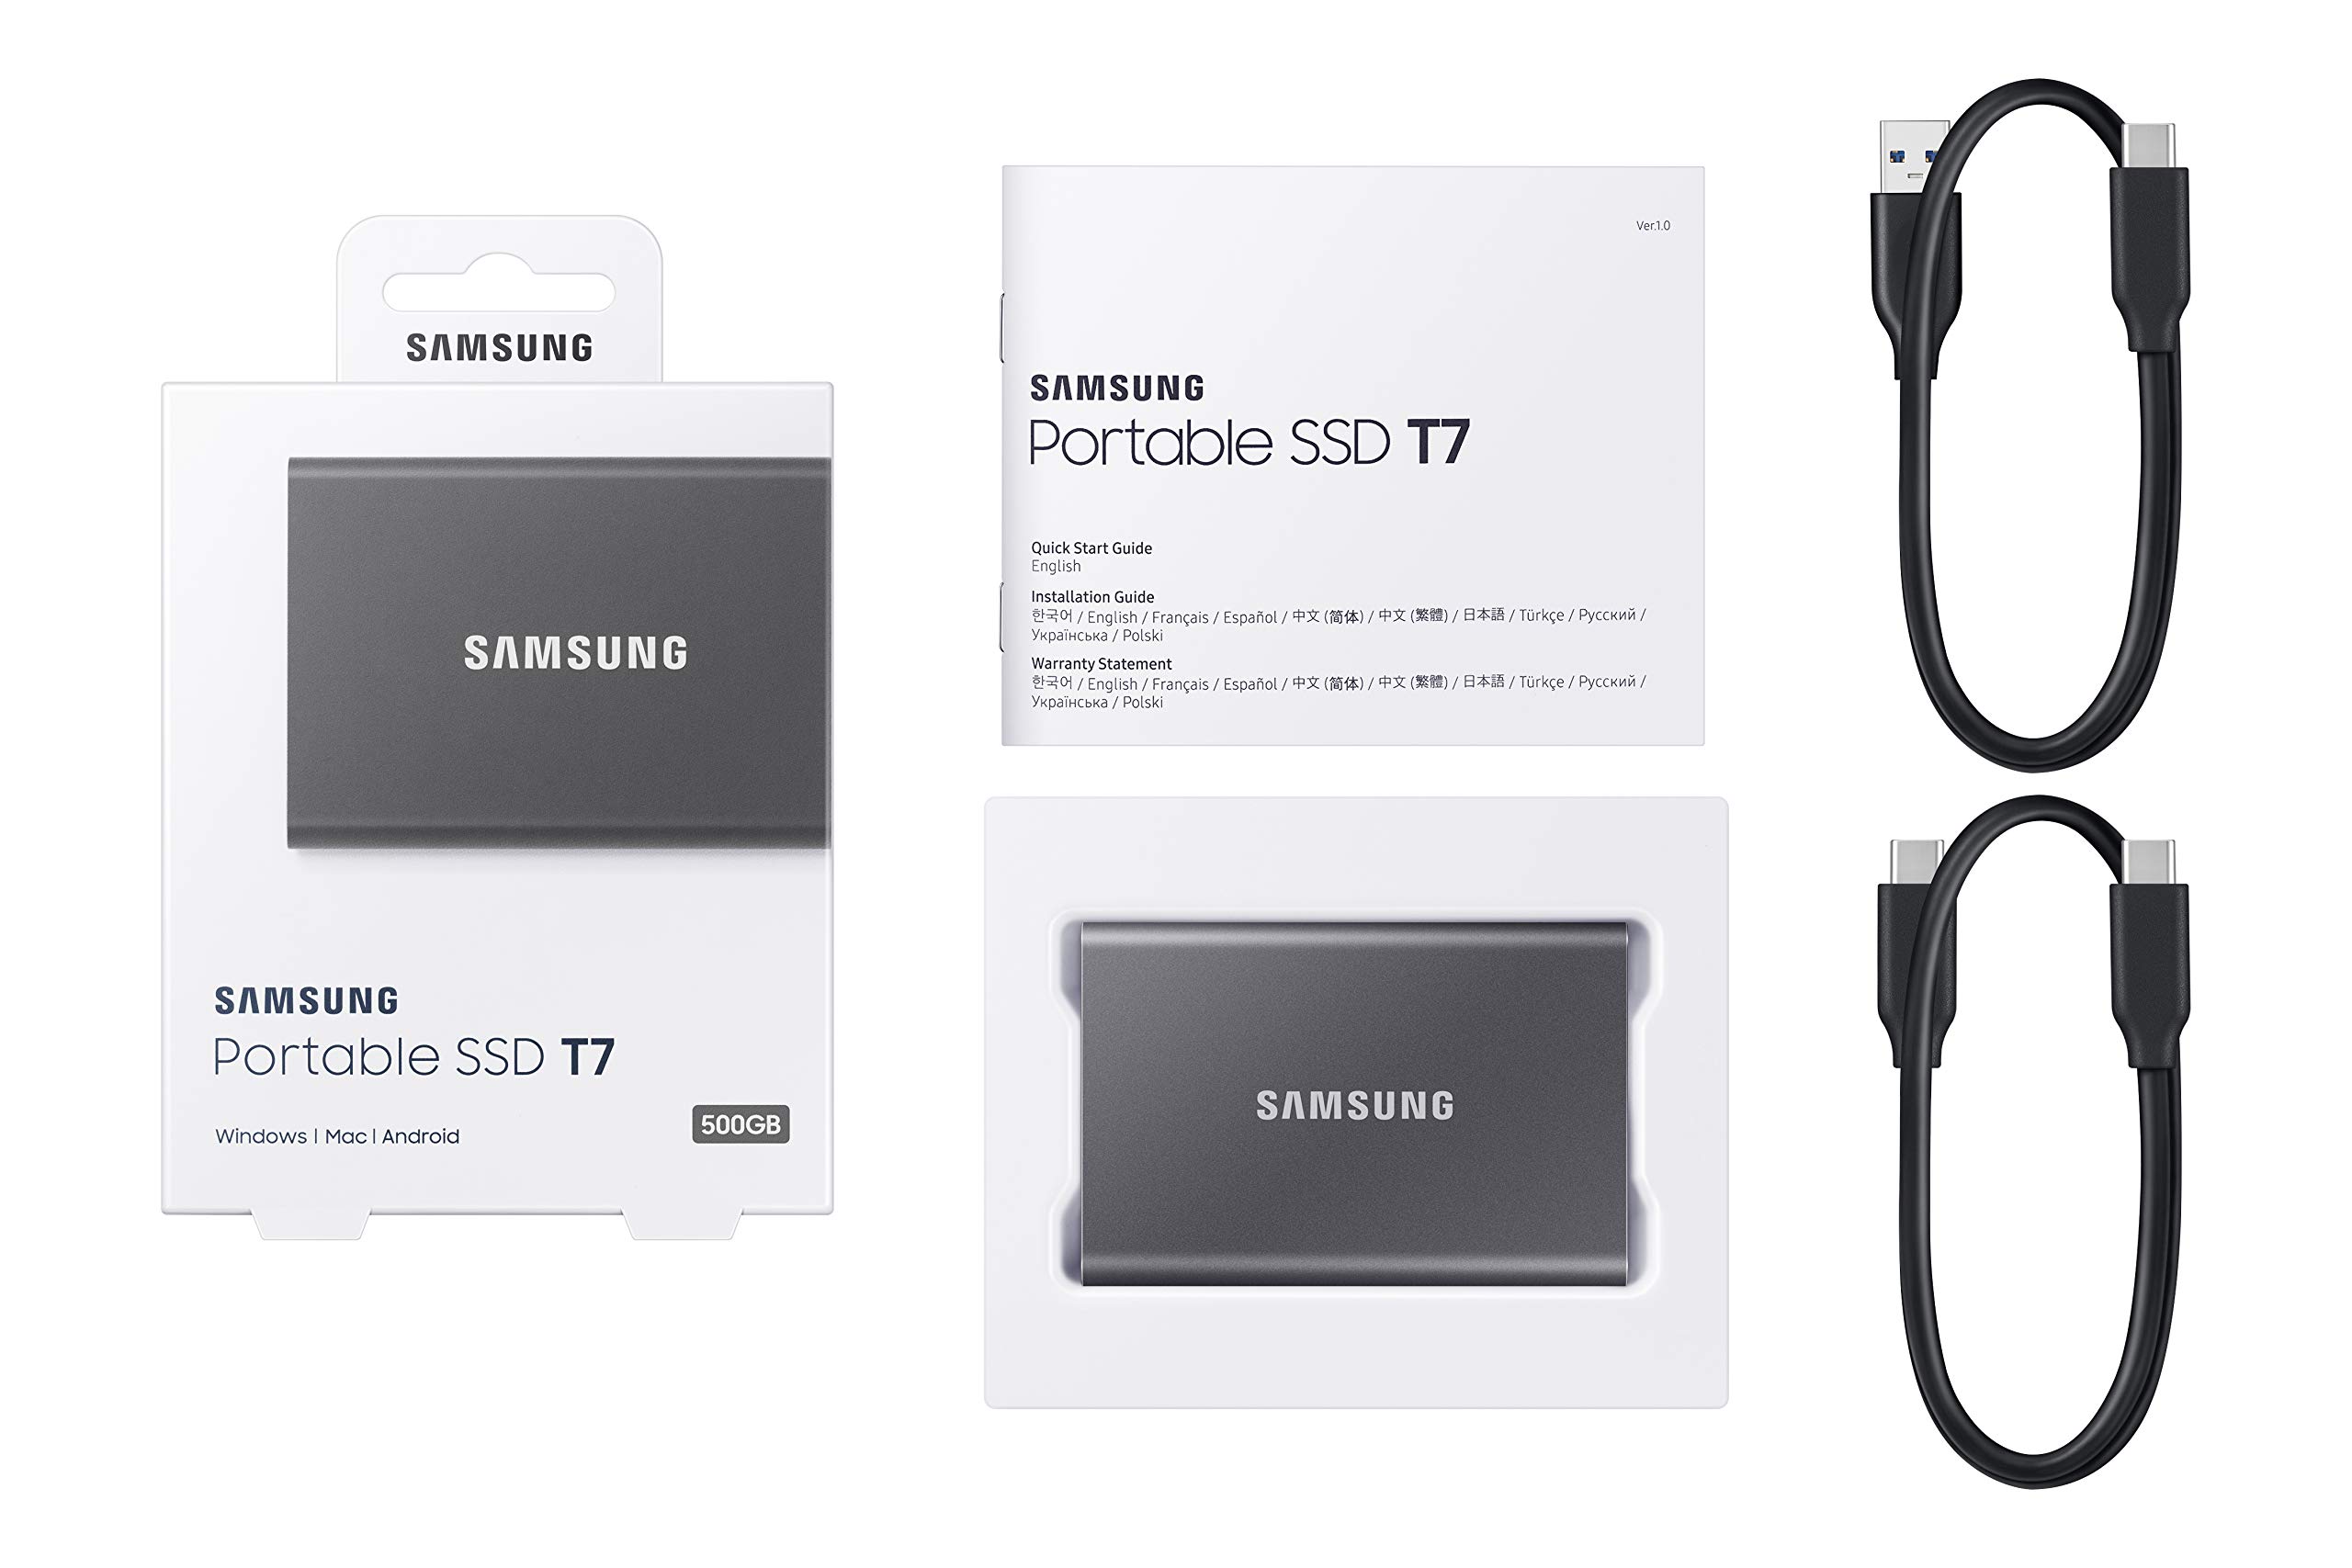 SAMSUNG T7 2TB, Portable SSD + 2mo Adobe CC Photography, up to 1050MB/s, USB 3.2 Gen2, Gaming, Students, & Professionals, External Solid State Drive (MU-PC2T0T/AM), Gray